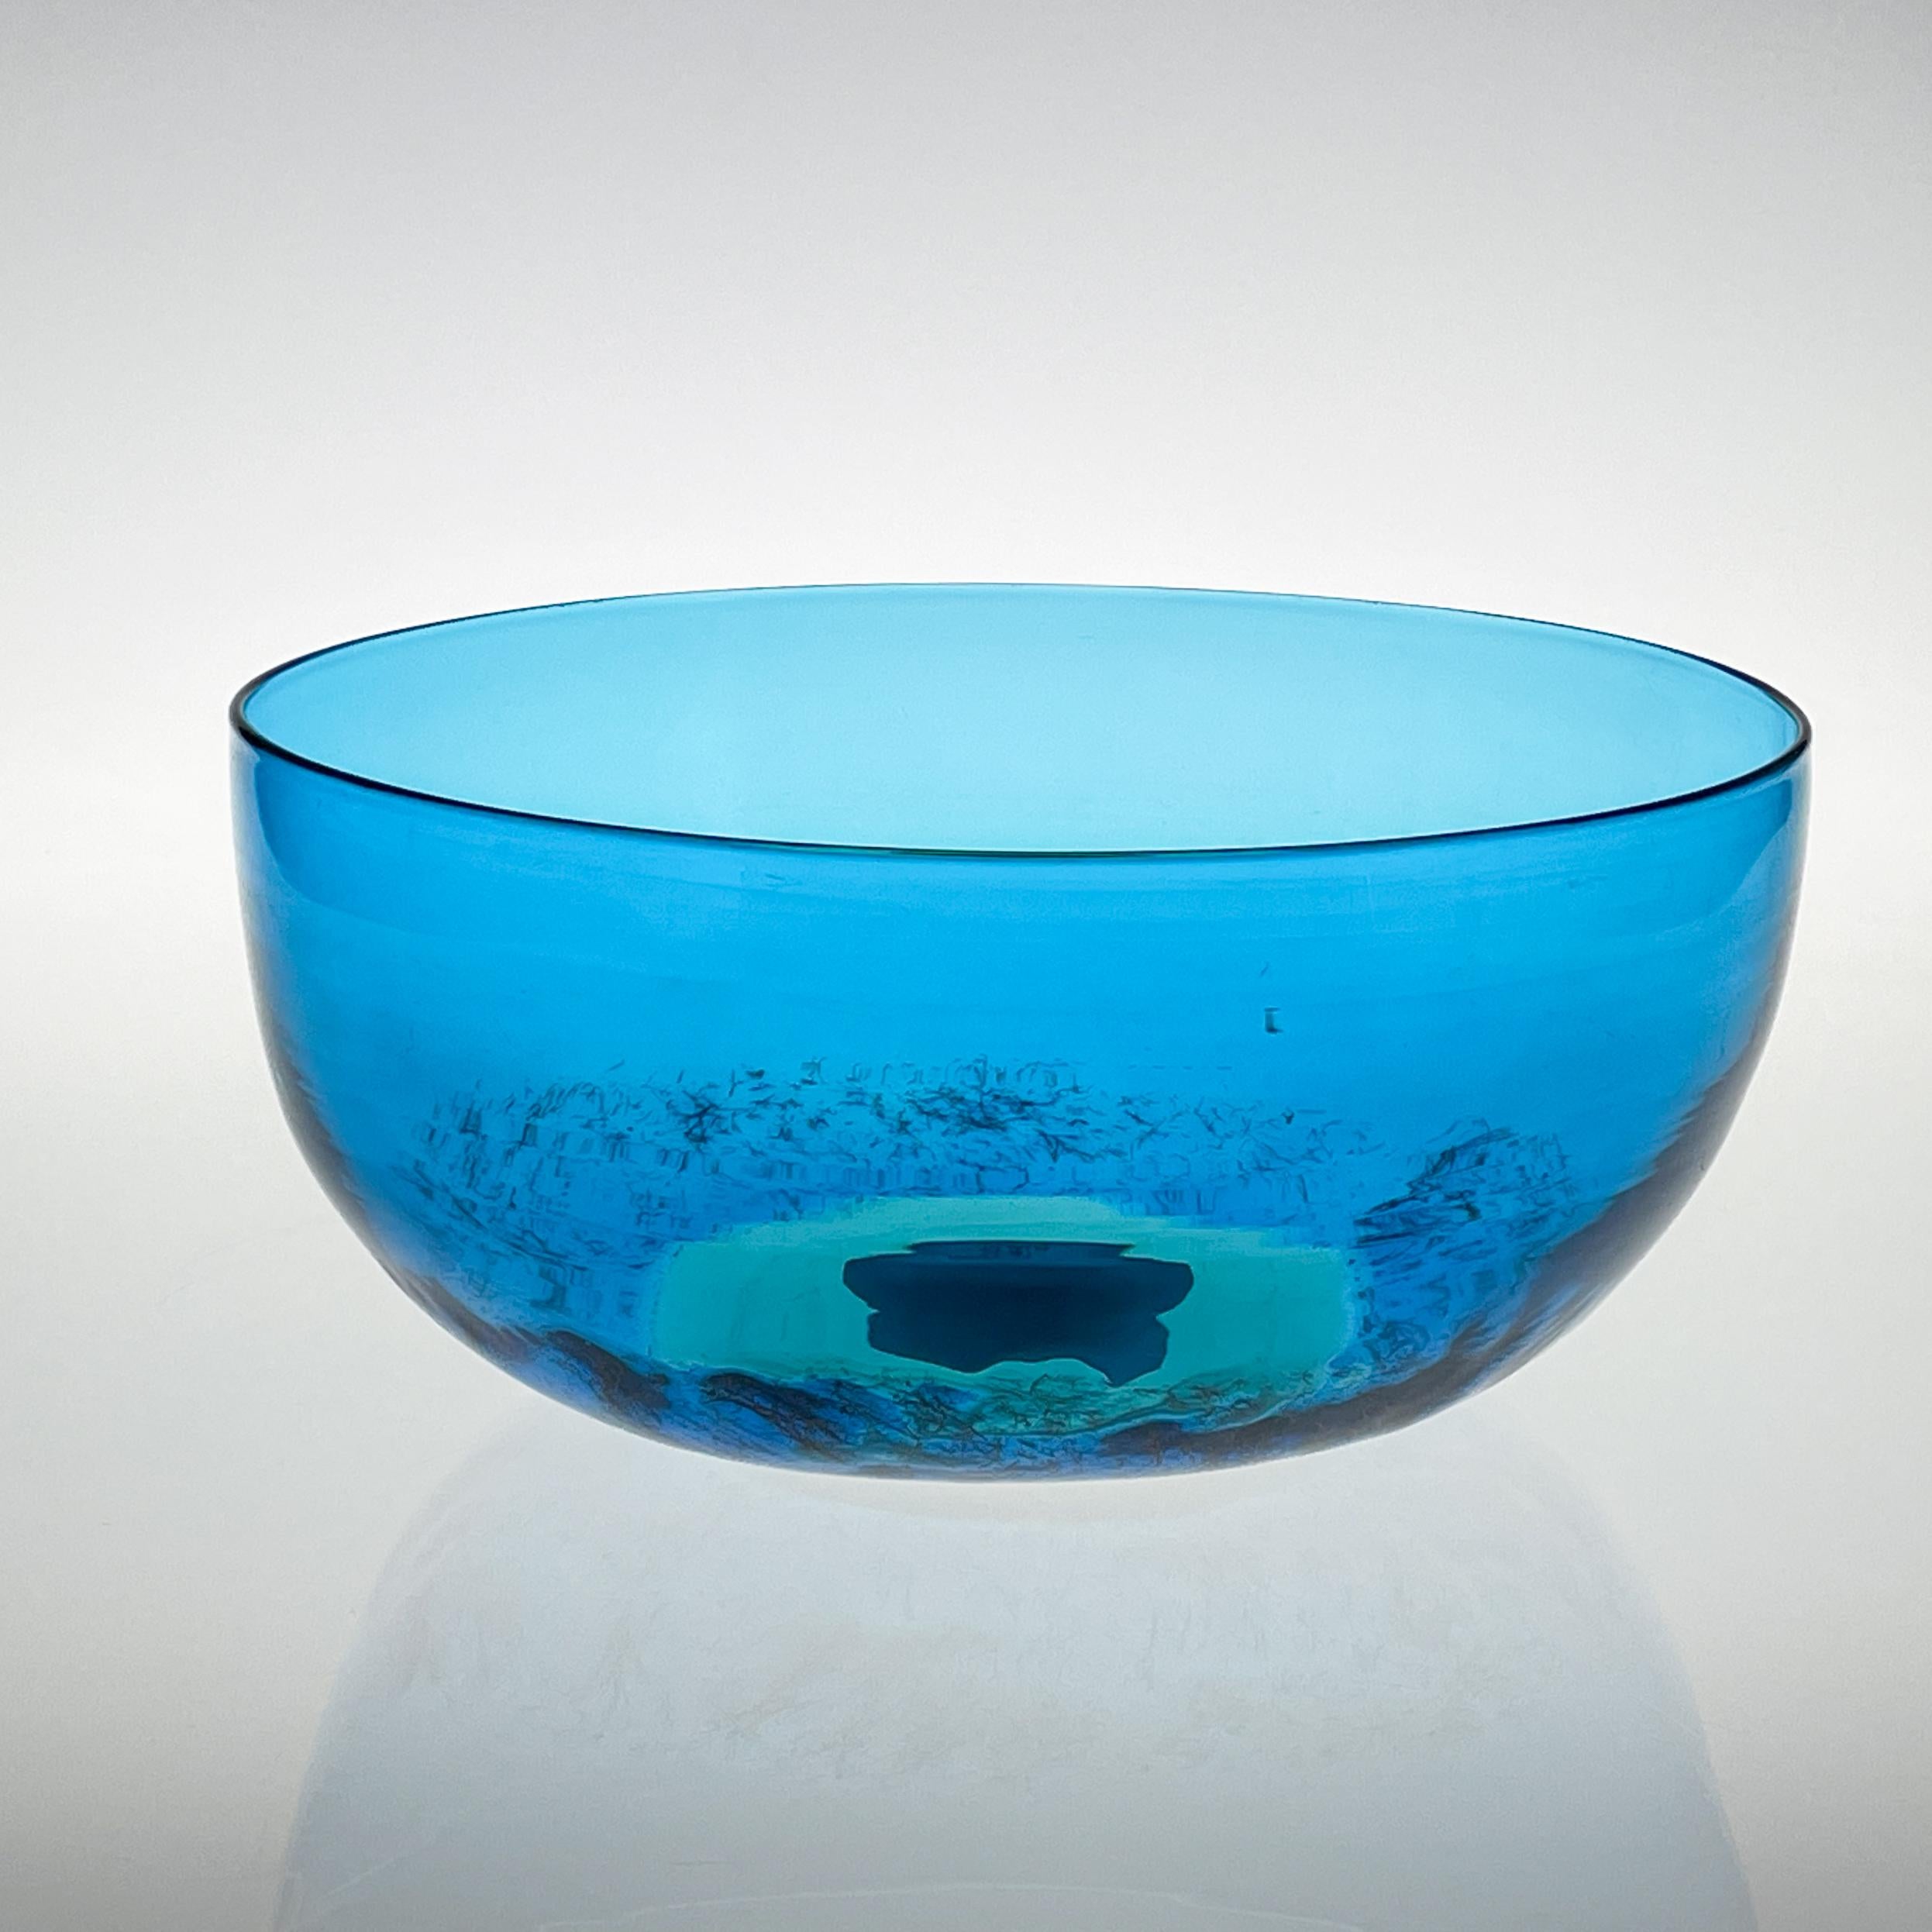 A capital “Inari” art-object/bowl, model 537.12, crafted in striking freeblown turquoise, pale yellow and black glass. Designed by the renowned Tapio Wirkkala in 1981-1982, this rare piece was brought to life by the skilled craftsmen of the Venini